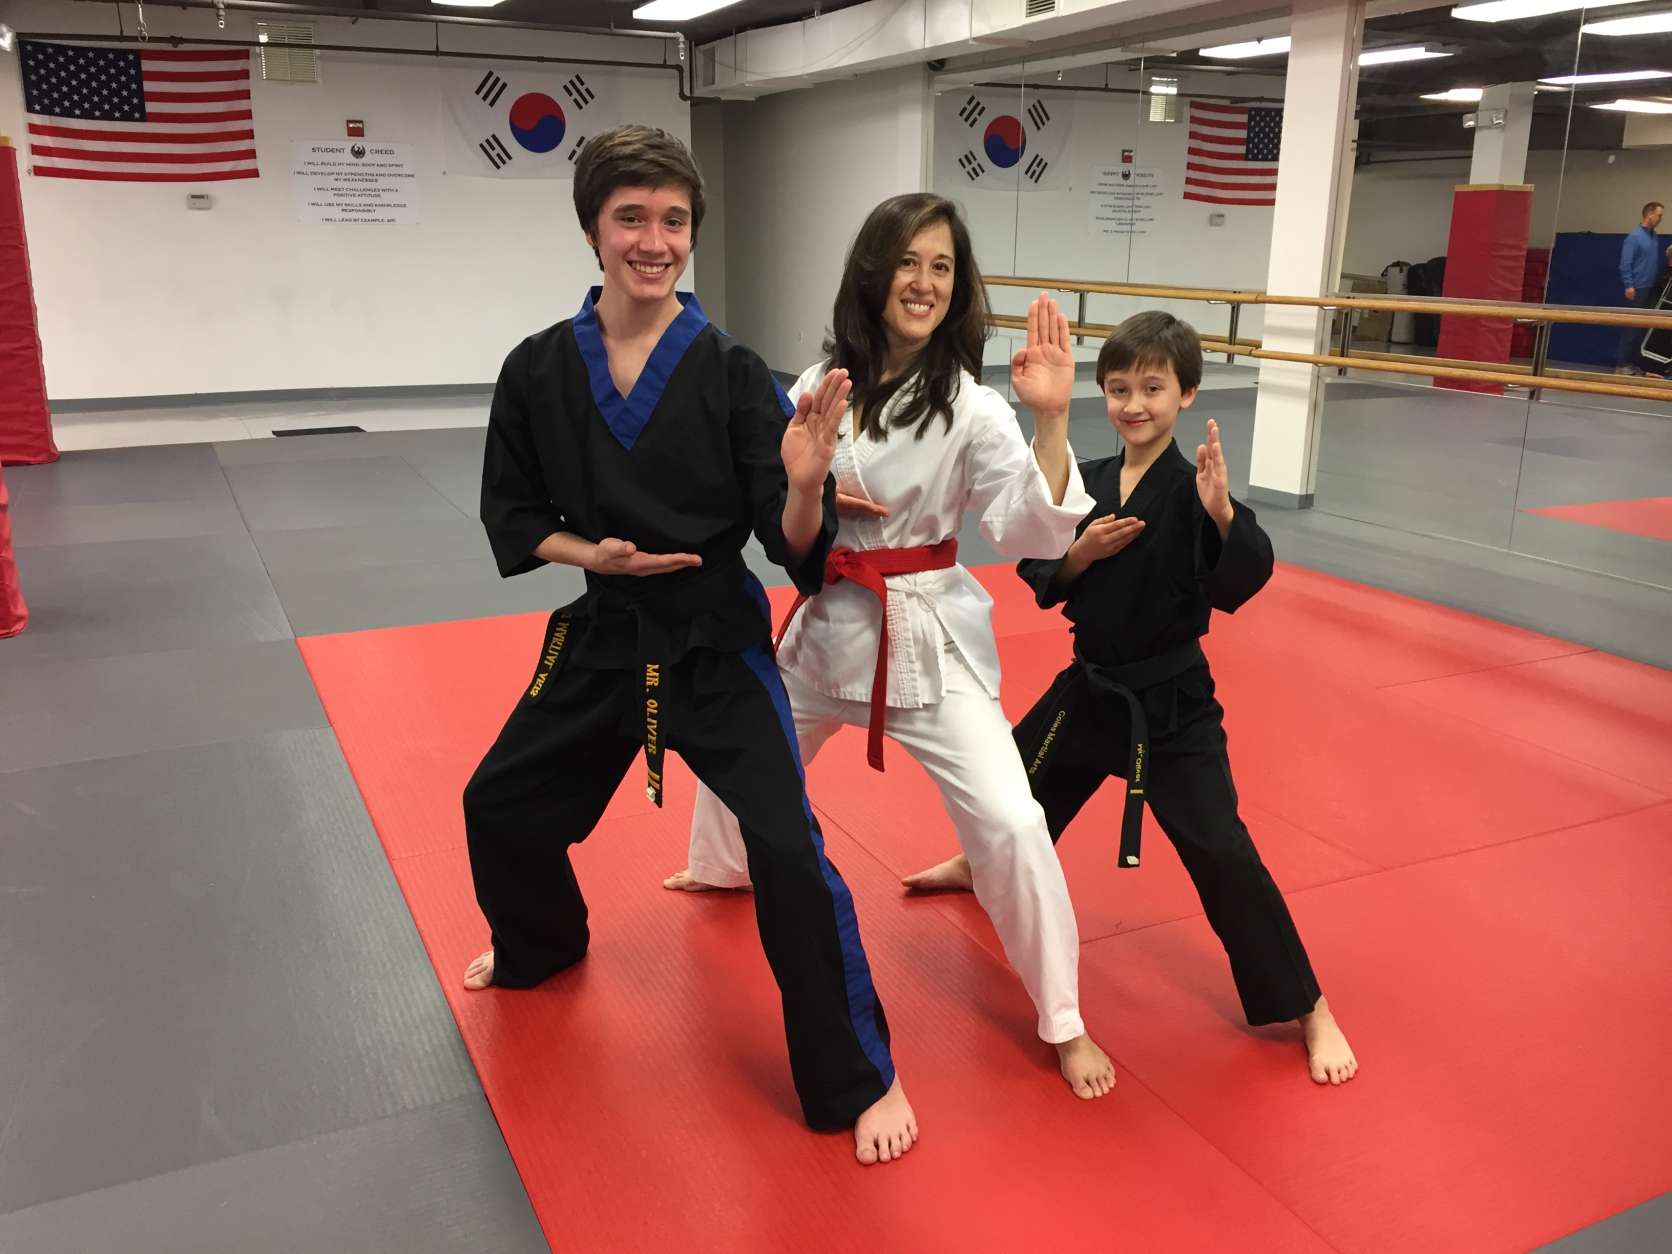 Left to right: Ryan Oliver, Melissa Marquez and Dylan Oliver pose at Coles Martial Arts Academy in Bethesda. The boys are black belts in taekwondo, and their mom just earned her red belt. (WTOP/Michelle Basch)